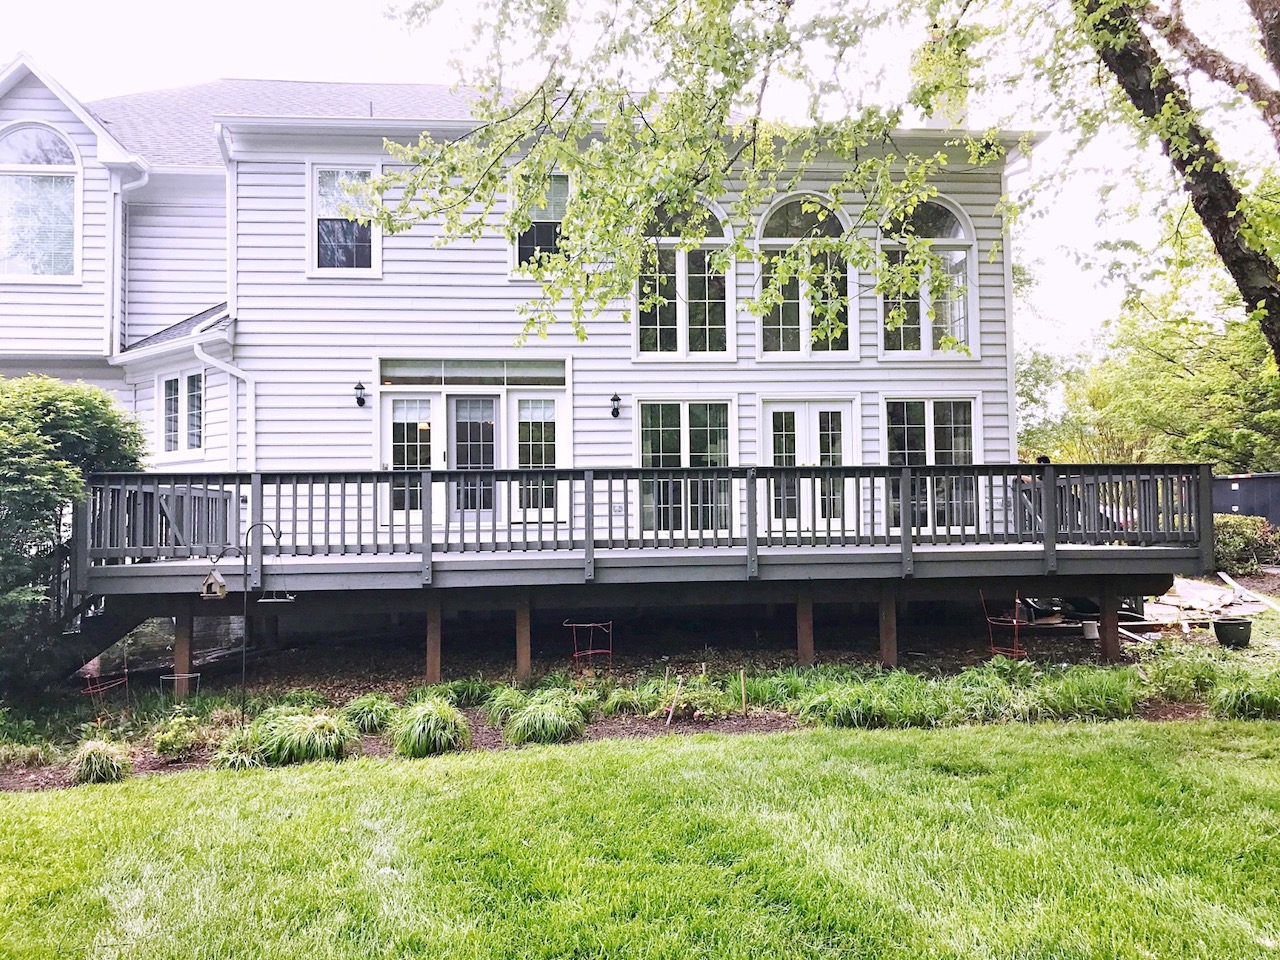 You may be wondering what to add to add to your deck replacement in Reston, VA. Keep reading to find out.